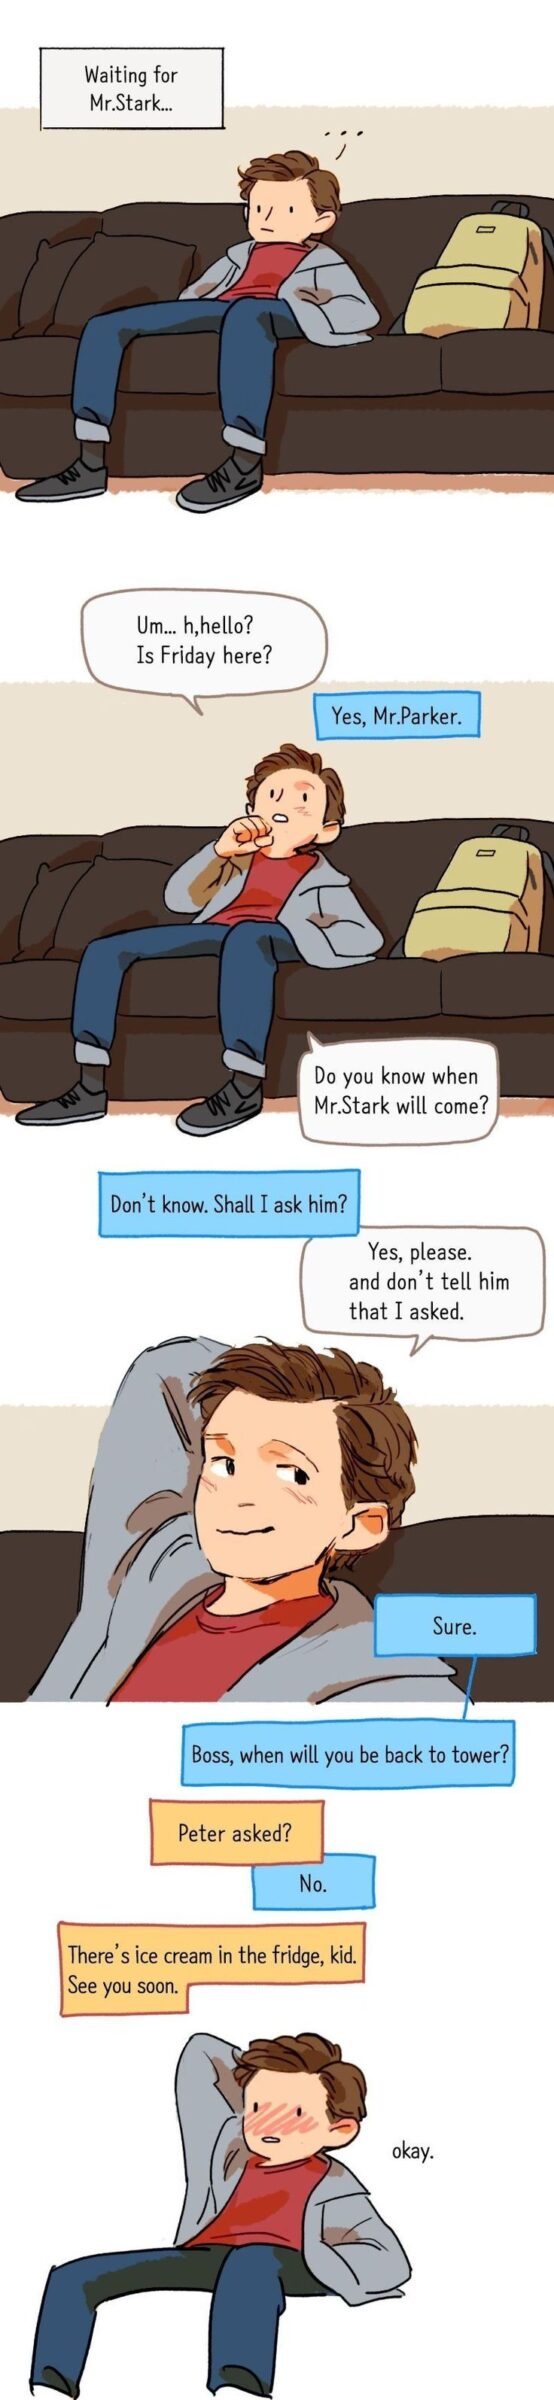 Wholesome memes, Peter, Waiting, Tony Stark, Tony, Mr-Stark Wholesome Memes Wholesome memes, Peter, Waiting, Tony Stark, Tony, Mr-Stark text: Waiting for Mr.Stark.„ Um... h,hello? Is Friday here? Yes, Mr.Parker. Do you know when Mr.Stark will come? Don't know. Shall I ask him? Yes, please. and don't tell him that I asked. fi Sure. Boss, when will you be back to tower? Peter asked? No. There's ice cream in the fridge, kid. See you soon. okay. 